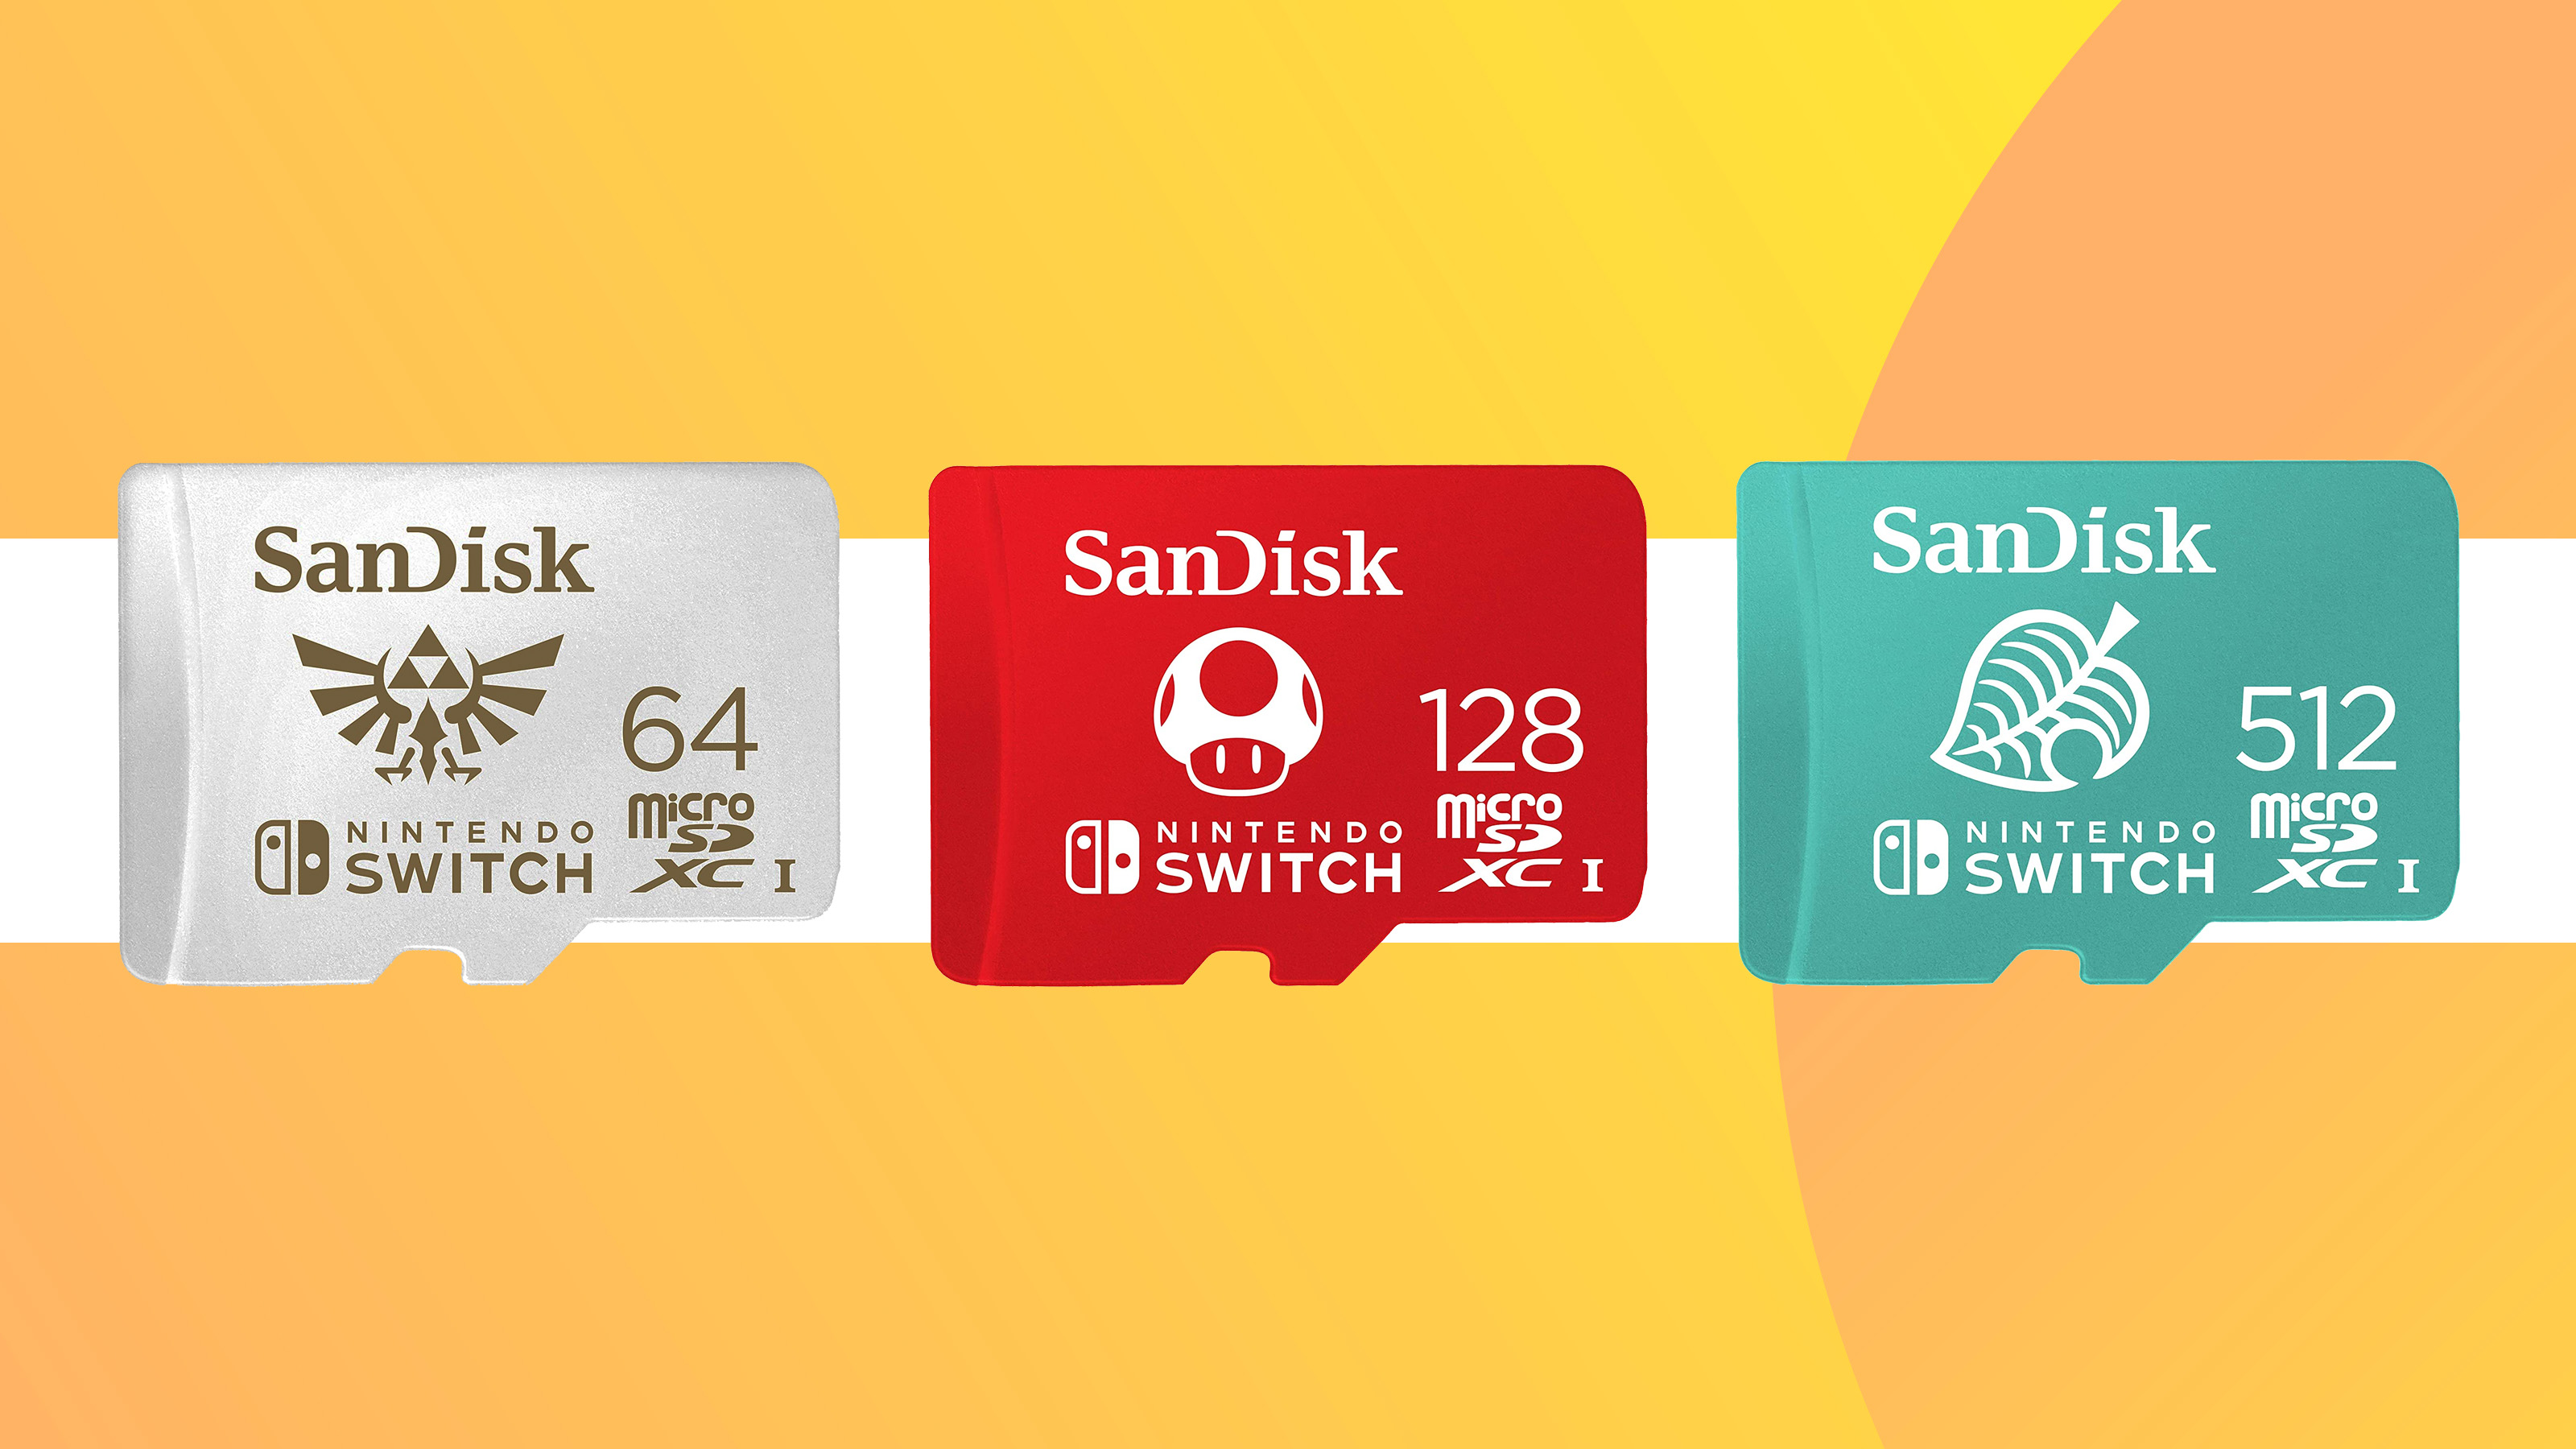 Product shots of the SanDisk Switch MicroSDs on a colourful background